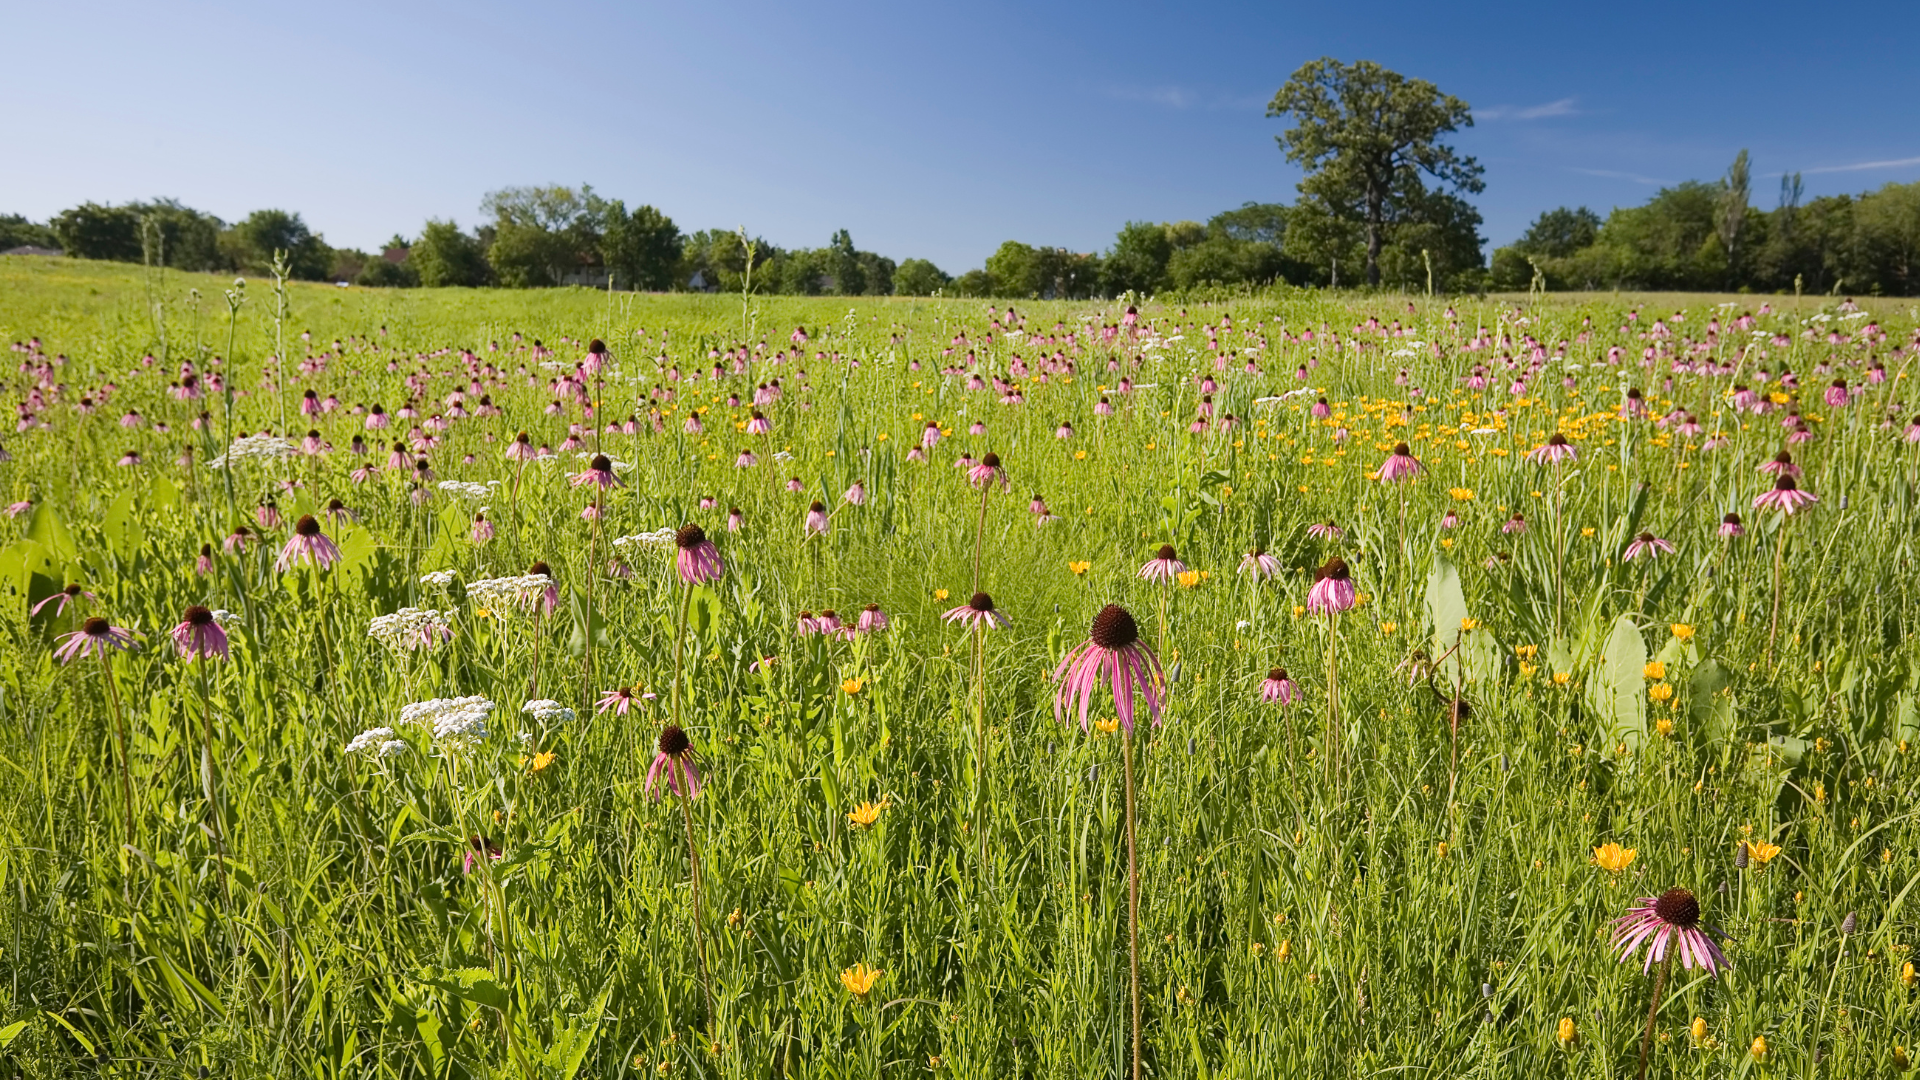 IDOT aims to increase the use of native grass in its right-of-way areas, as native vegetation is adapted to the local climate, including summer drought, and supports greater biodiversity, including wildlife and insect pollinators.